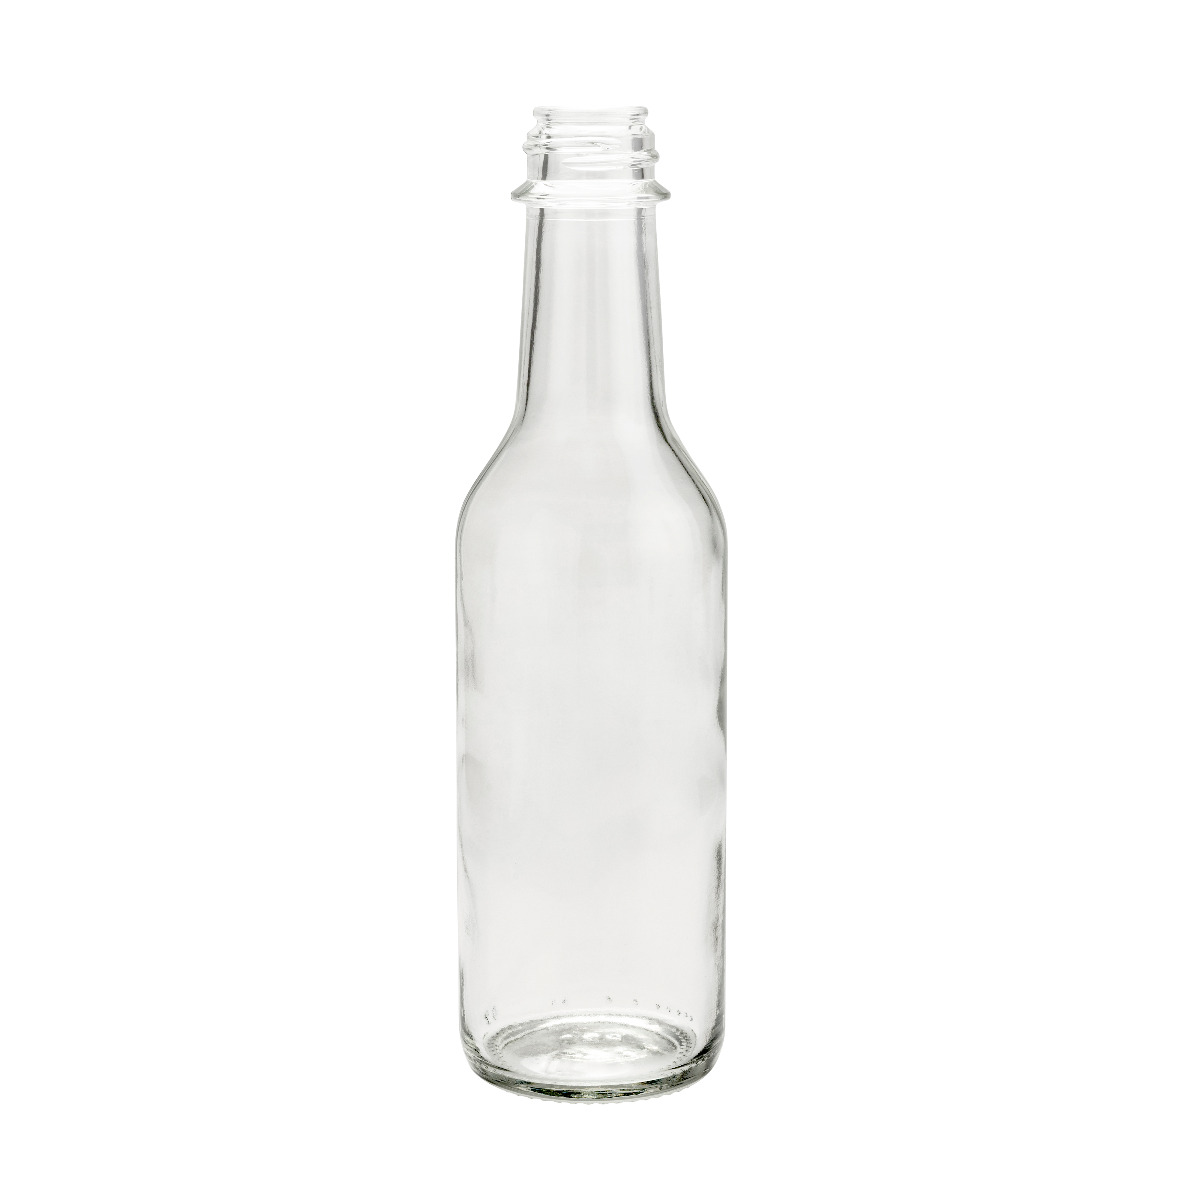 Glass bottle container